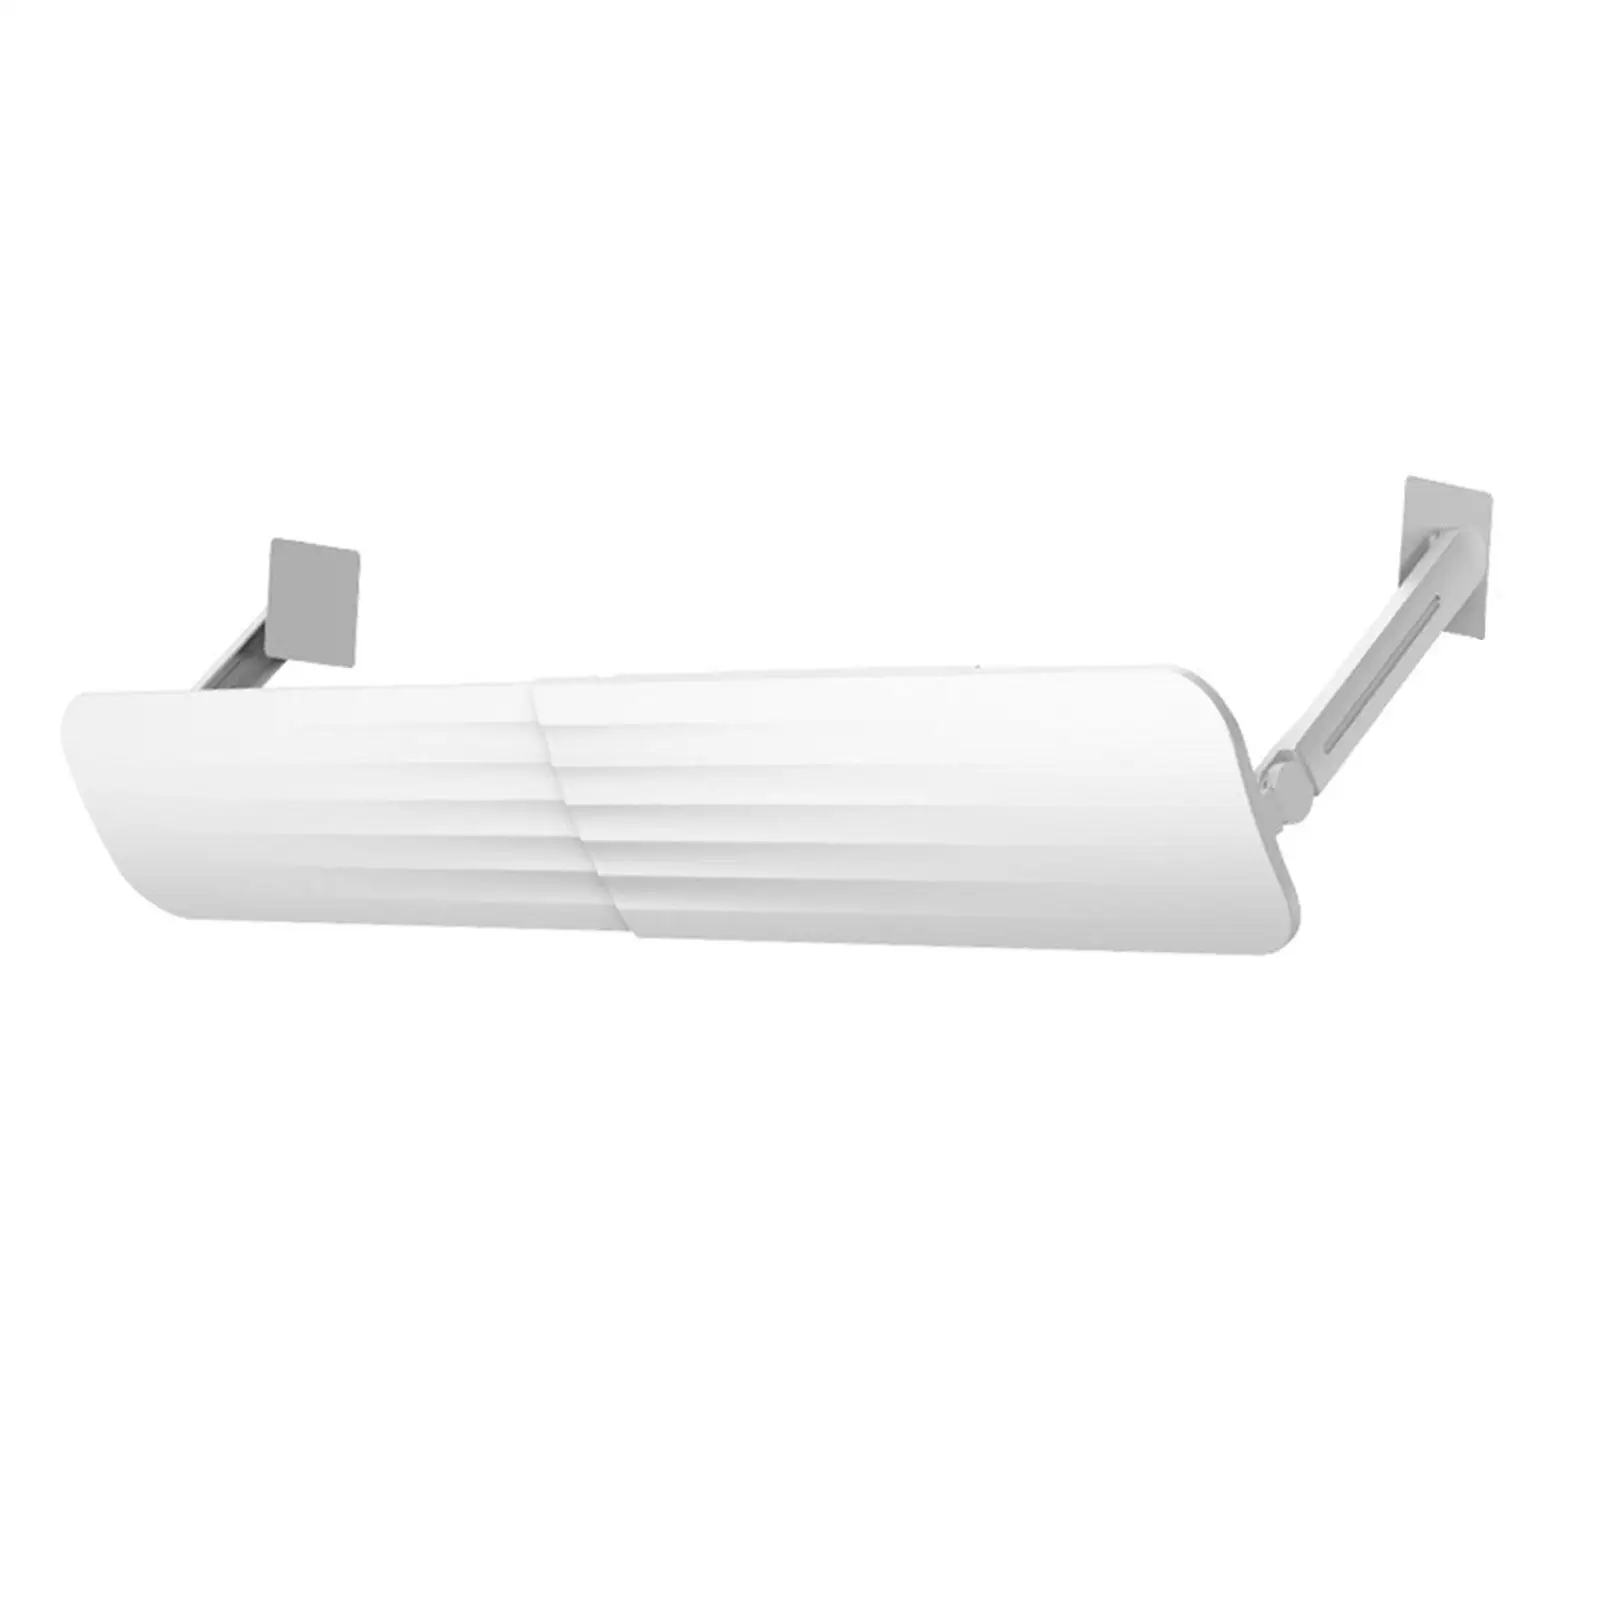 Air Conditioner Deflector Multifunction for Hotel Hanging Air Conditioner